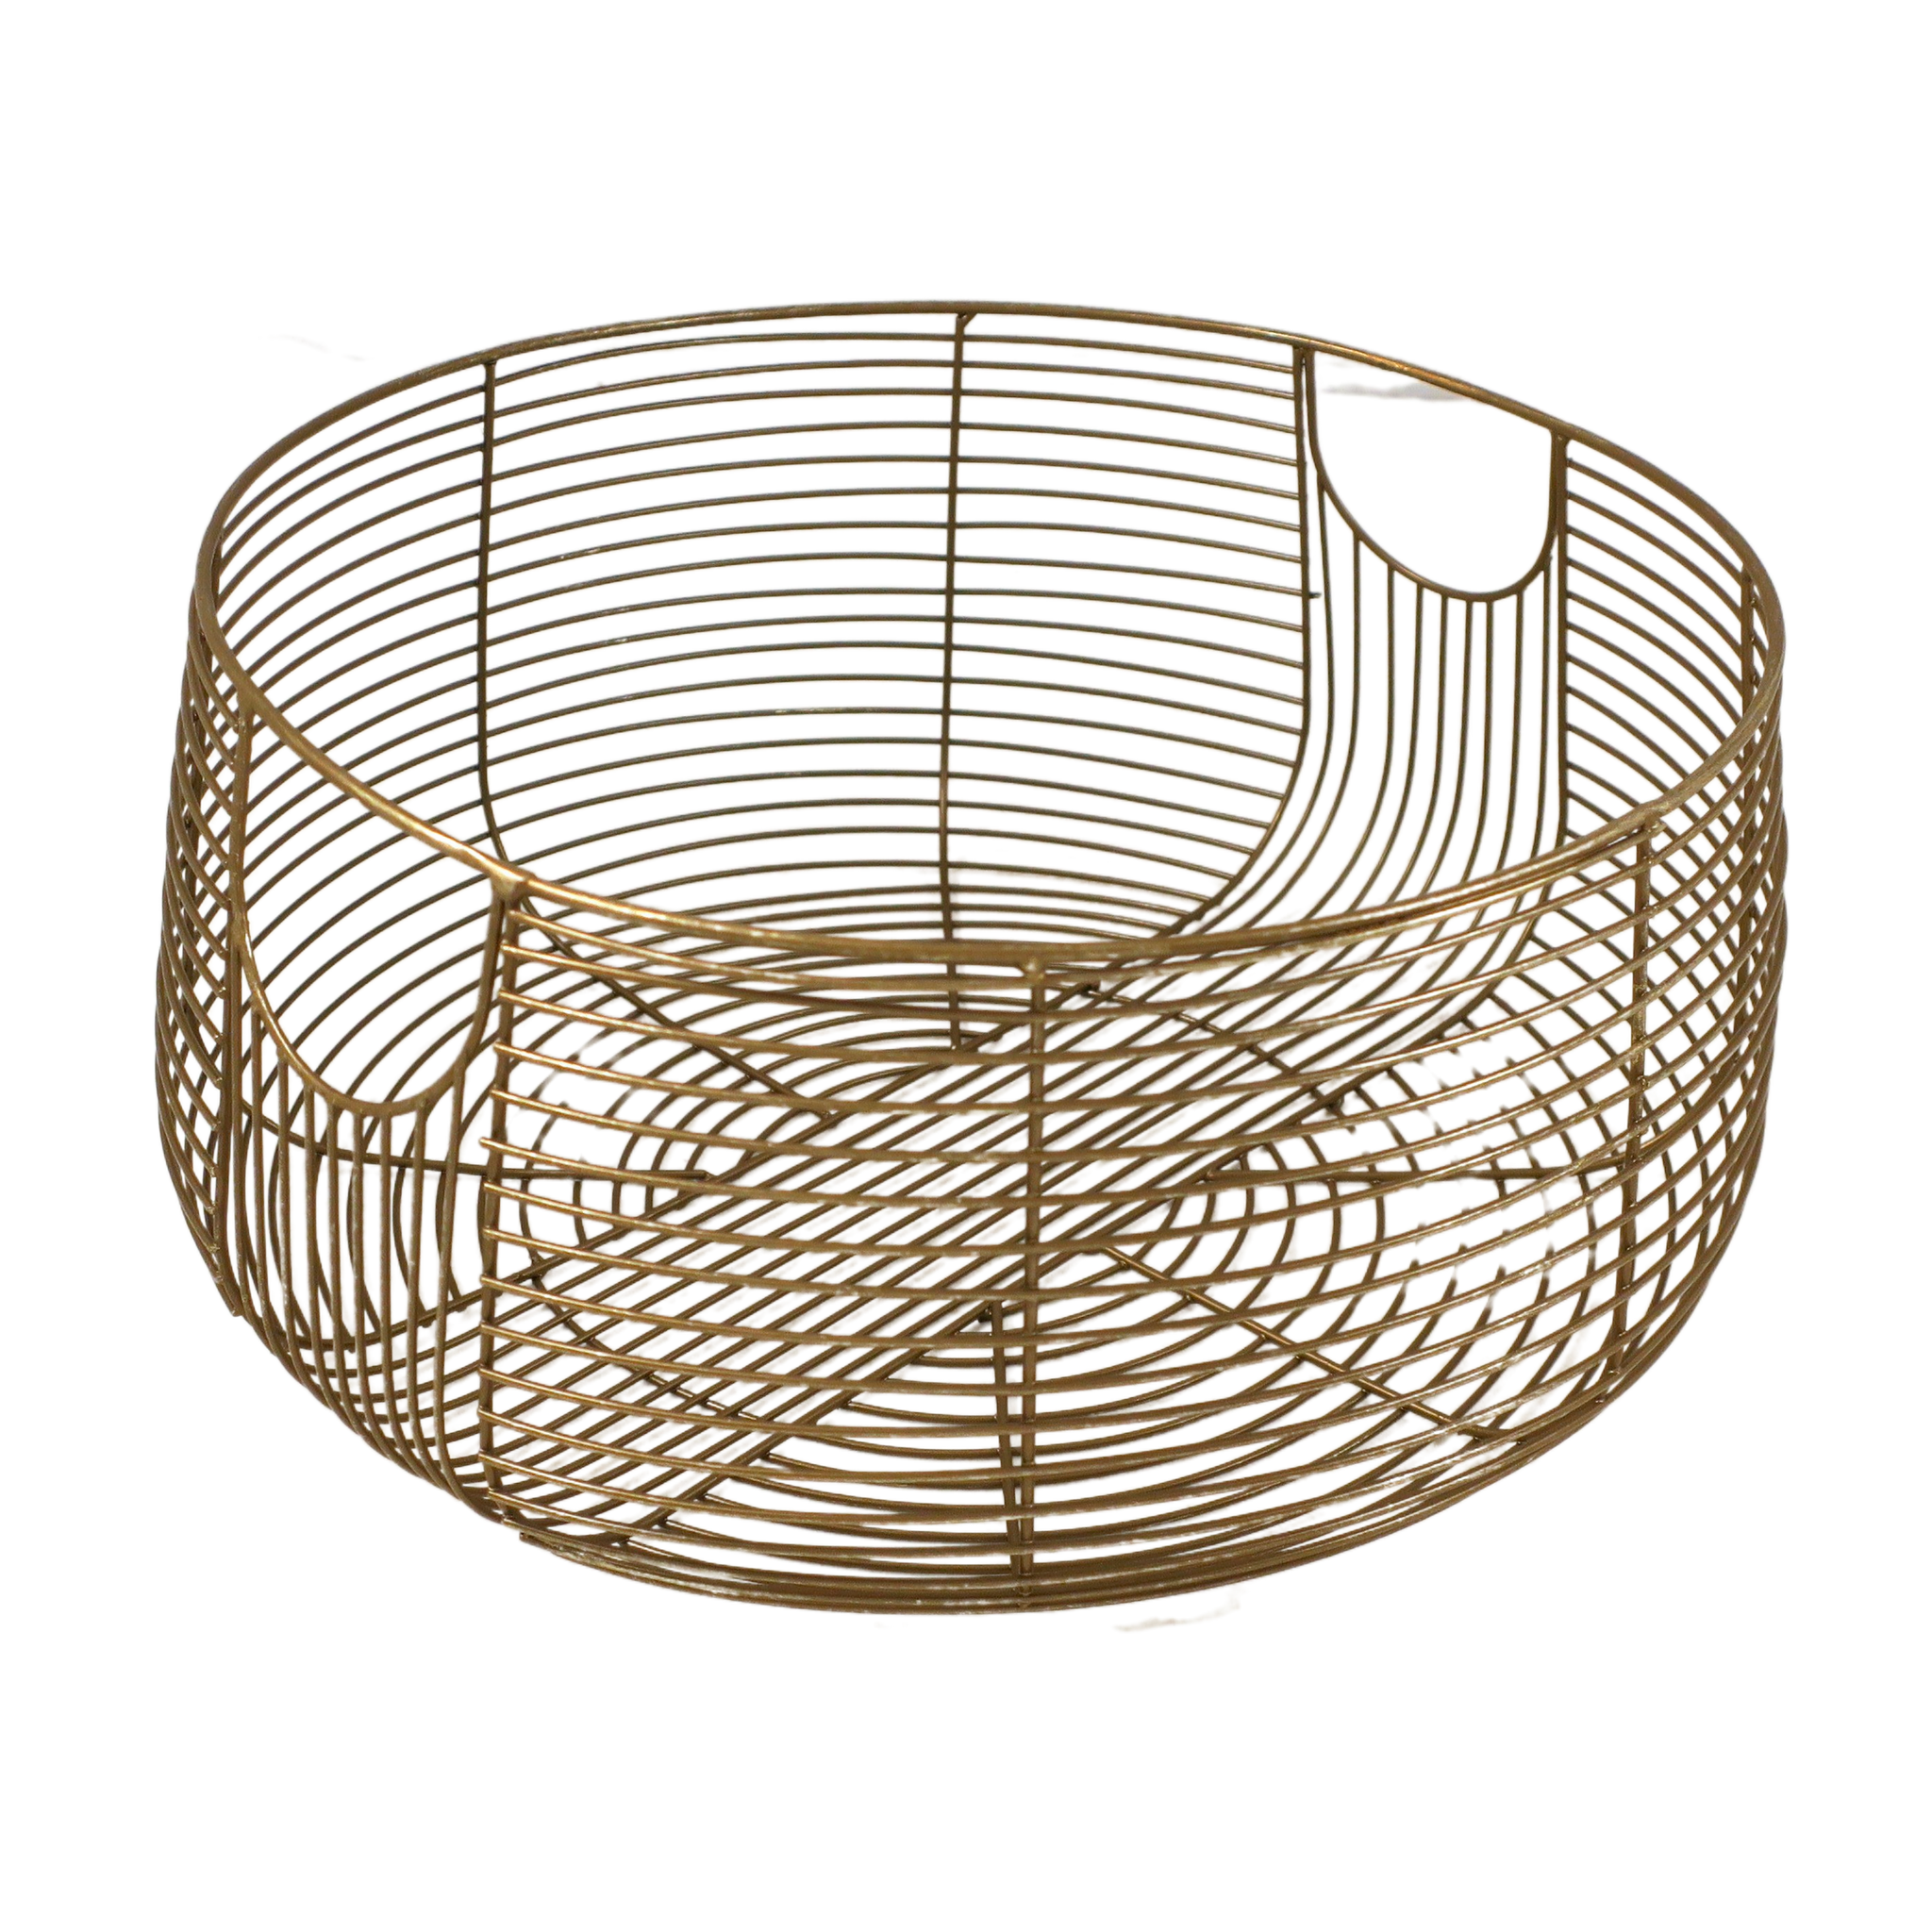 82303 WIRE Fruit Bowl